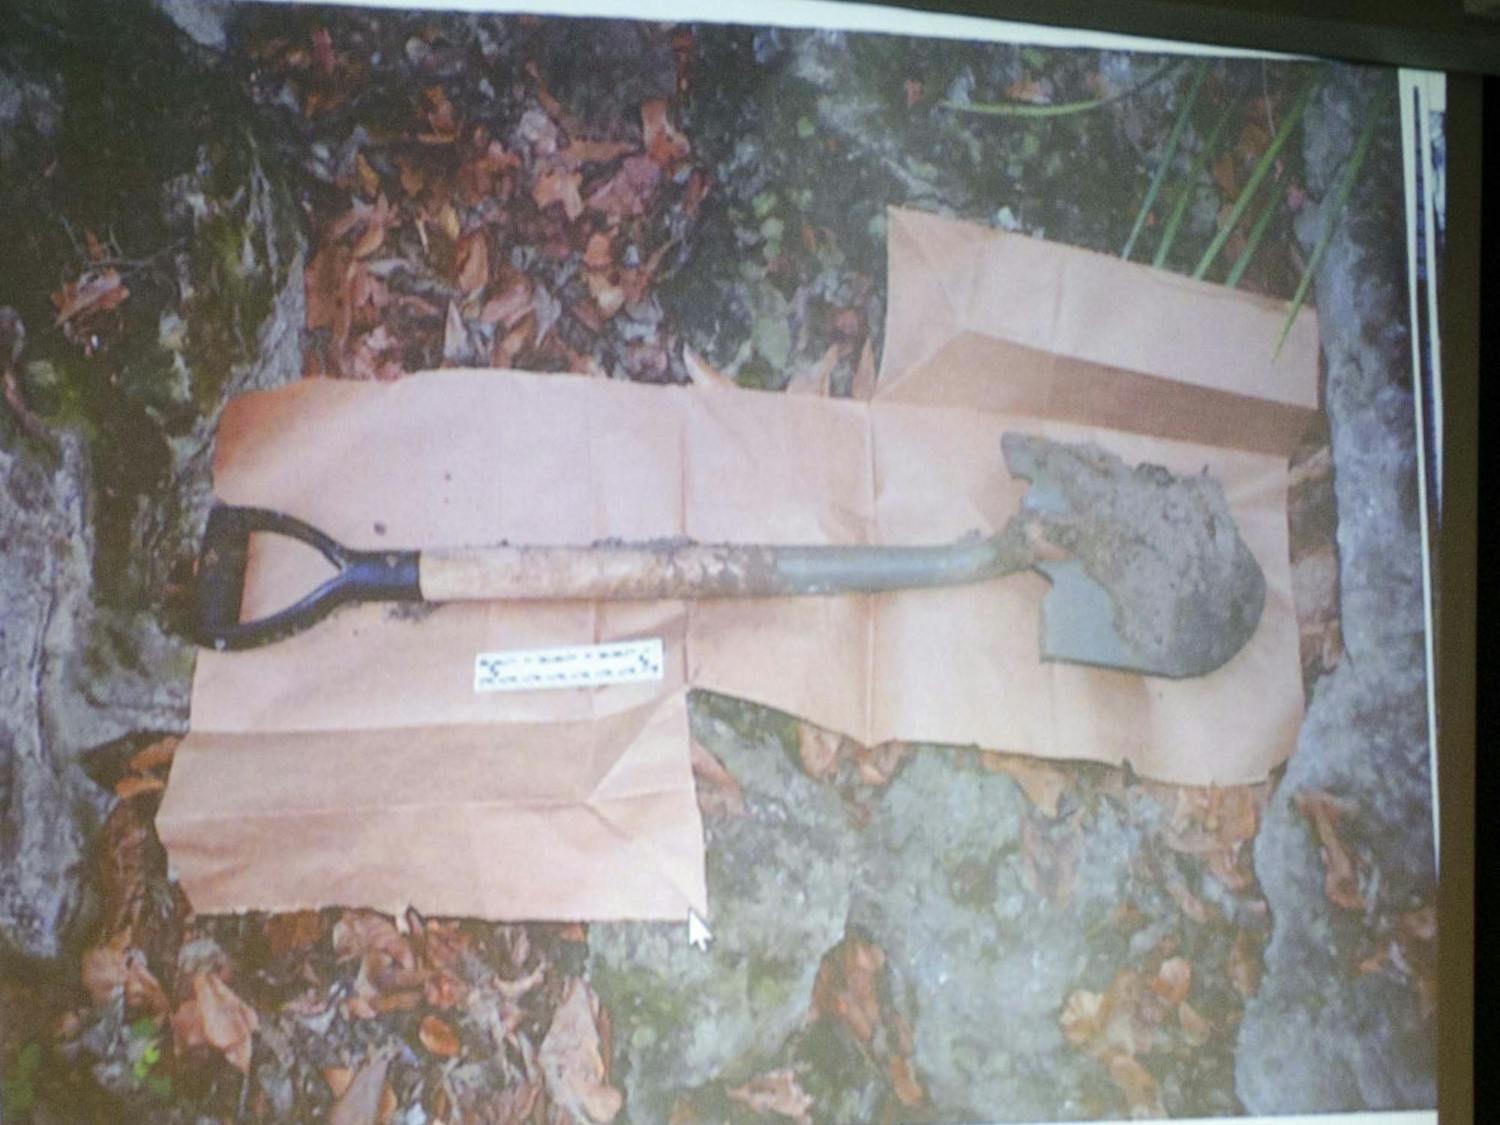 The shovel found under a boardwalk at Spyglass Apartments, right around the corner from Pedro Bravo’s apartment.